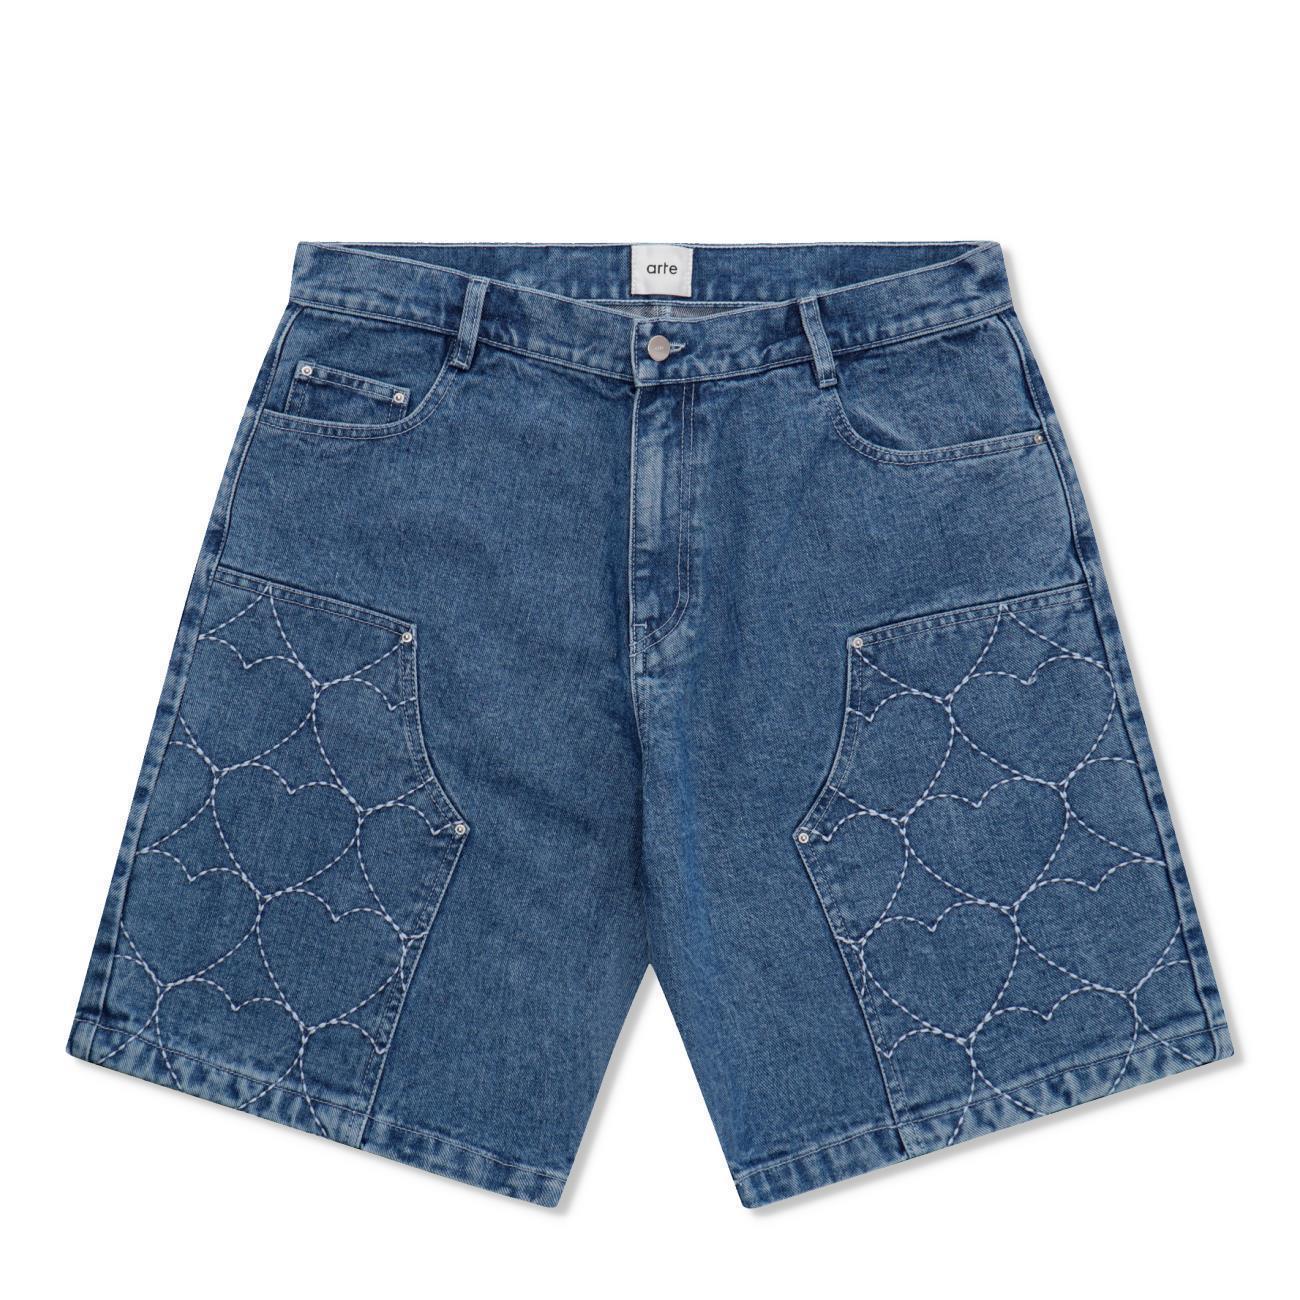 Workwear Embroidery Shorts